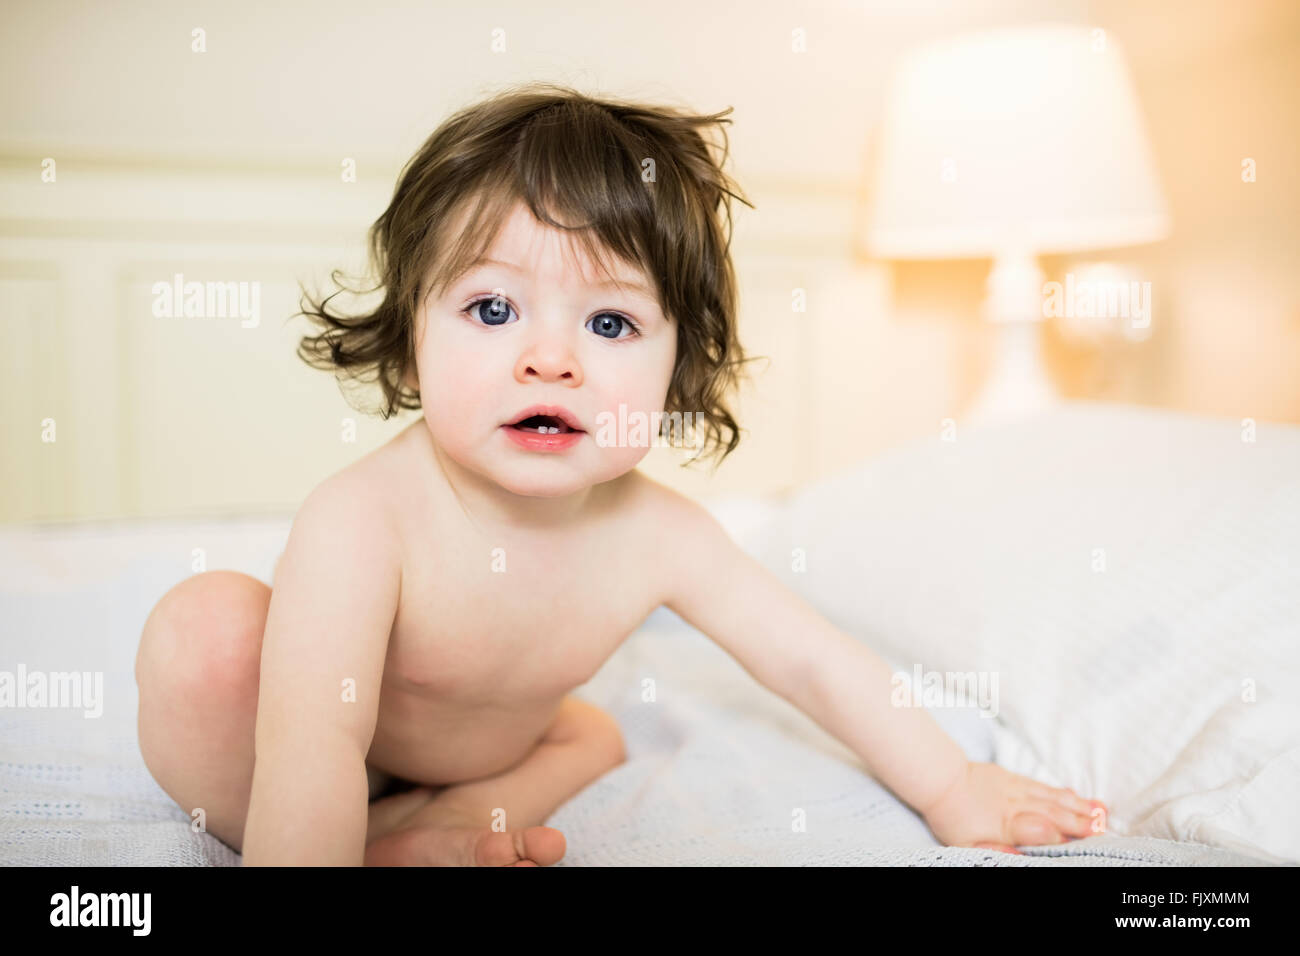 Cute baby sitting on the bed Stock Photo